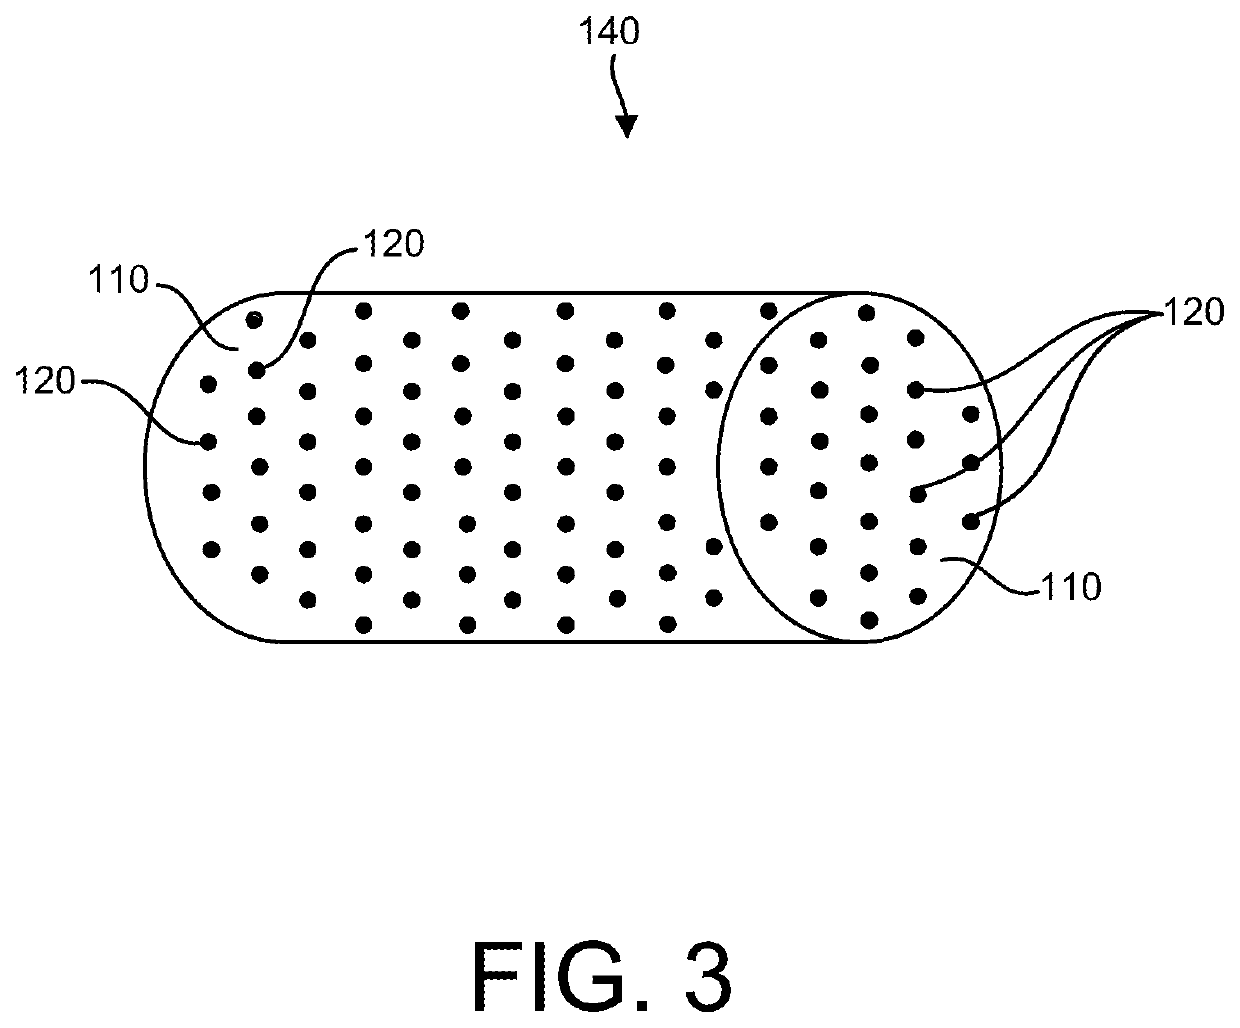 Biodegradation-enhanced synthetic fiber and methods of making the same